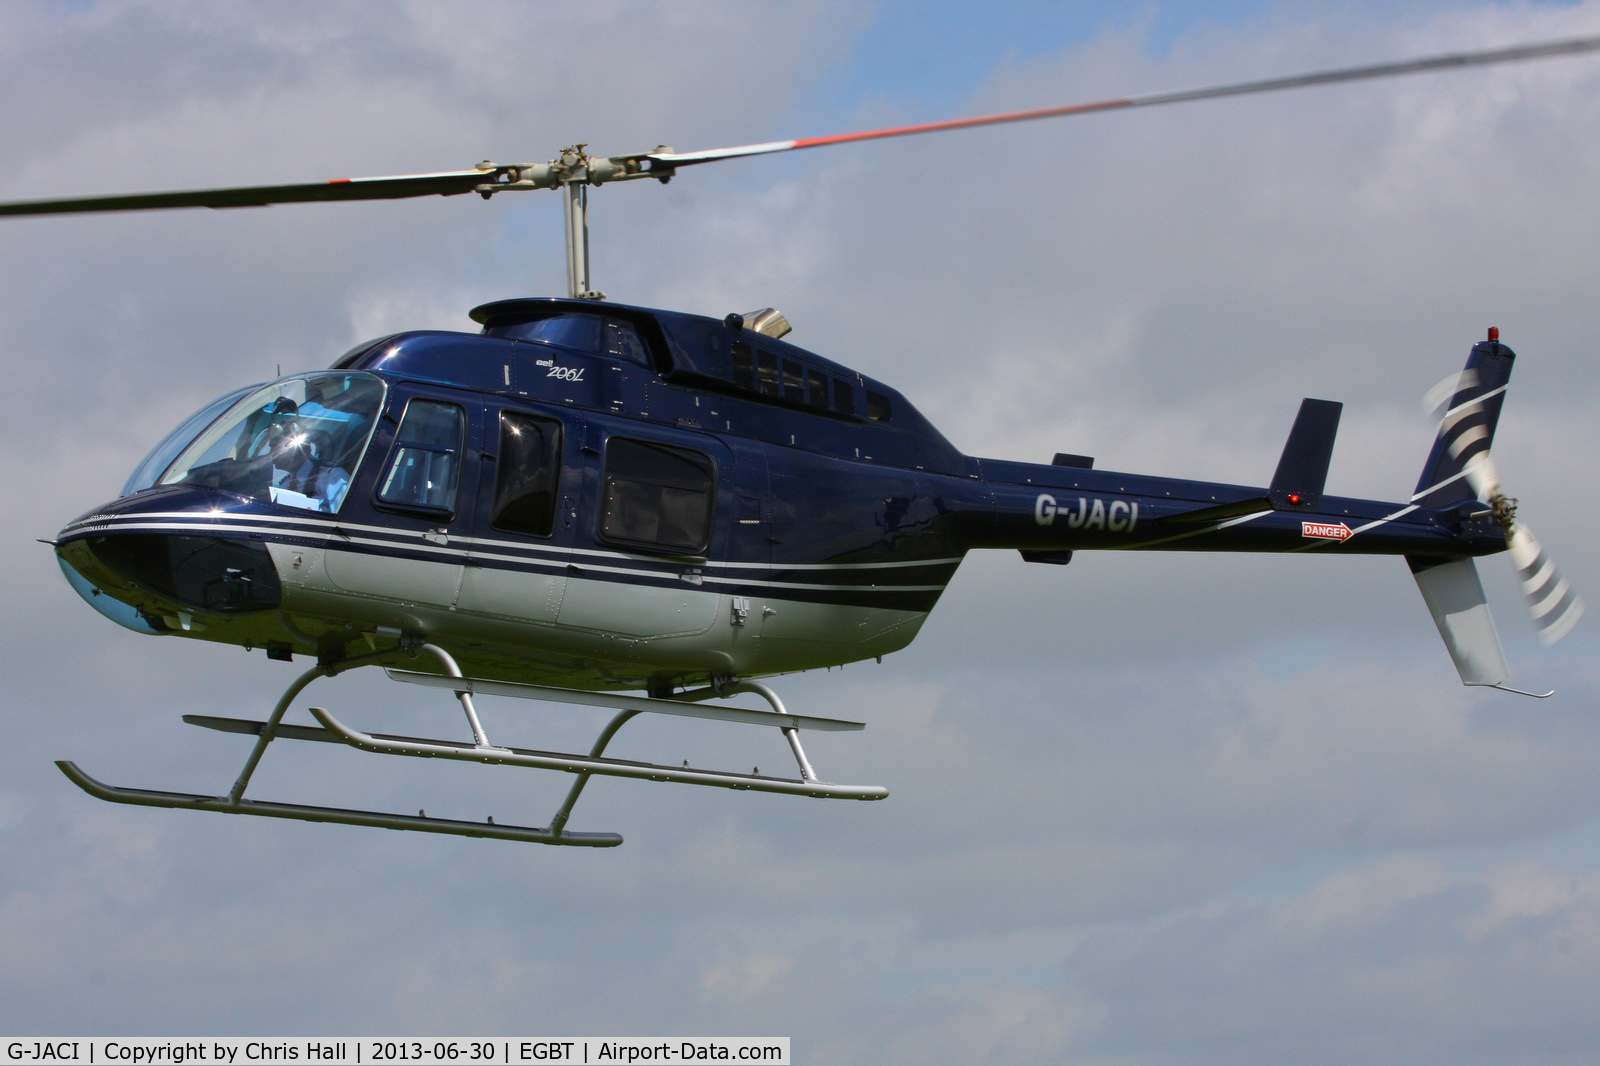 G-JACI, 2008 Bell 206L-4 LongRanger IV LongRanger C/N 52381, being used for ferrying race fans to the British F1 Grand Prix at Silverstone